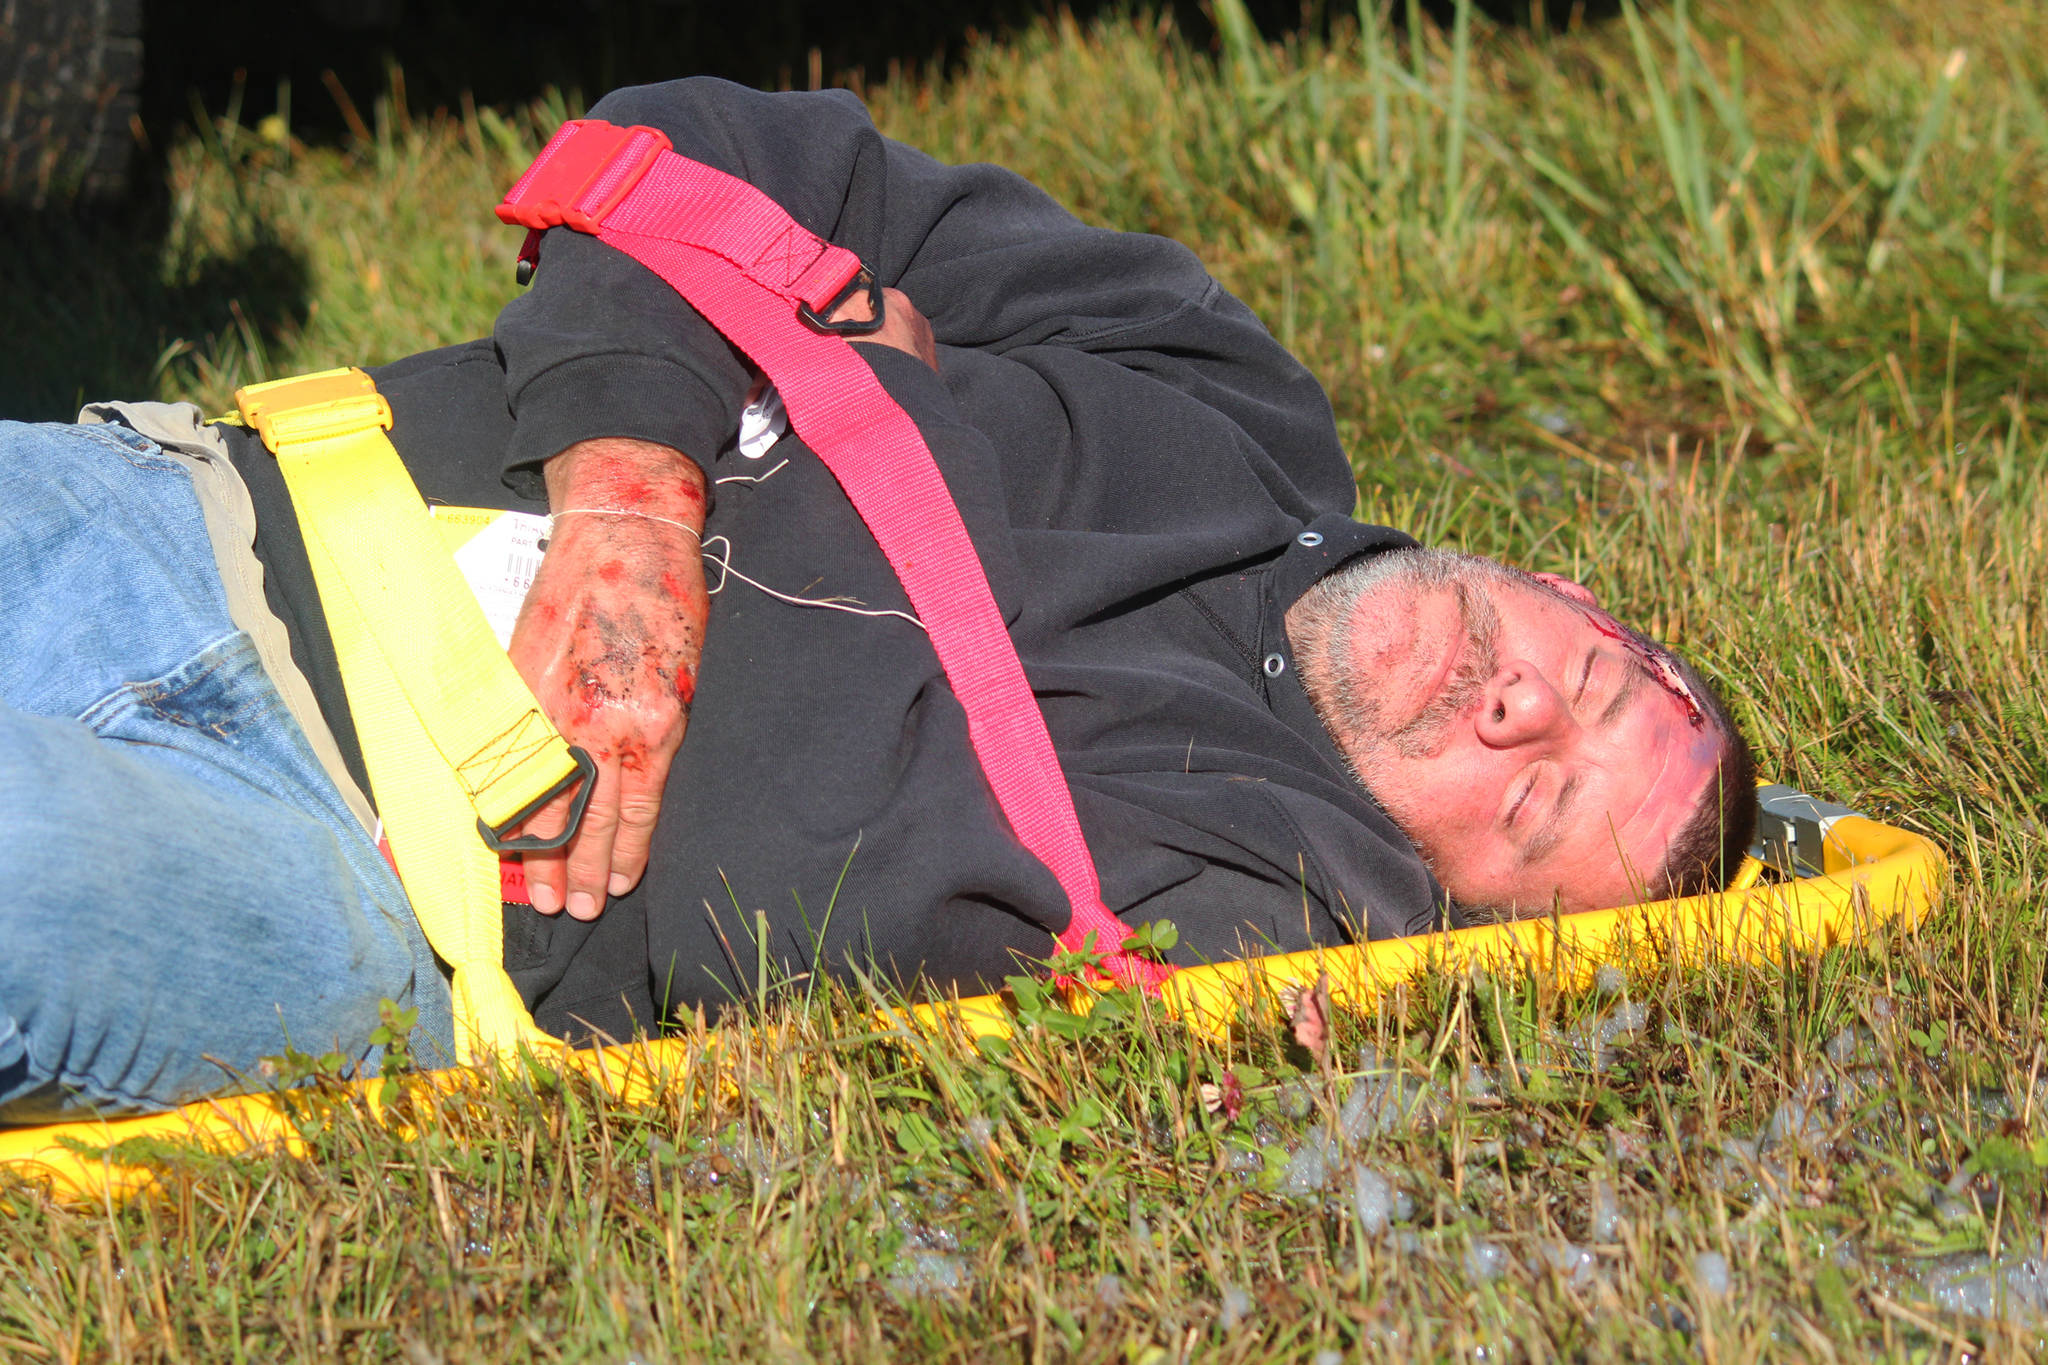 John Dunson, an equipment operator and firefighter for the Homer Airport, poses as an injured plane crash victim during an emergency exercise Saturday, Aug. 19, 2017 at the airport in Homer, Alaska. Dunson and more than 20 community members volunteered to participate as crash victims for the drill that’s required every three years for the airport to remain in Federal Aviation Administration compliance. (Photo by Megan Pacer/Homer News)